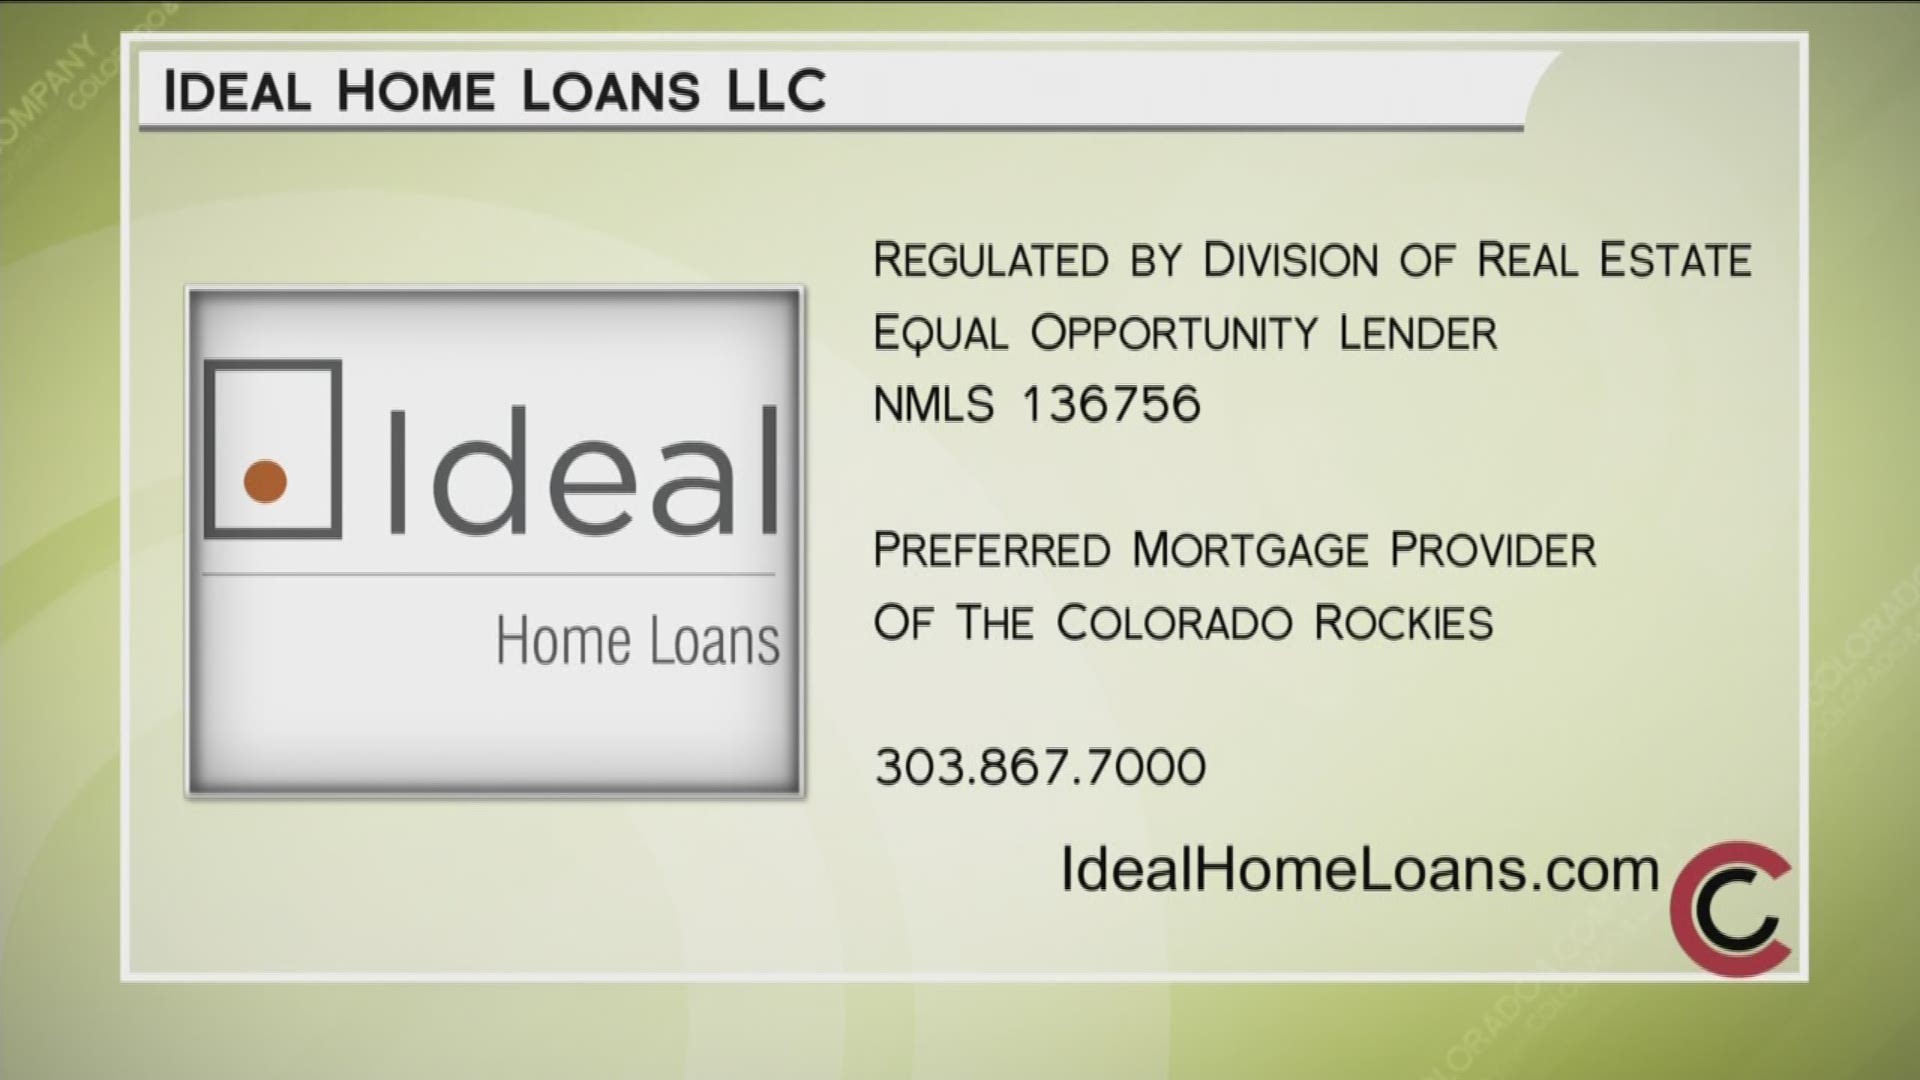 Take advantage of Ideal Home Loans’ free home mortgage consultation. Your first payment won’t be due until September! Their philosophy is “First we listen, then we lend.” Get started today by calling 303.867.7000, or online at www.IdealHomeLoans.com.
THIS INTERVIEW HAS COMMERCIAL CONTENT. PRODUCTS AND SERVICES FEATURED APPEAR AS PAID ADVERTISING.